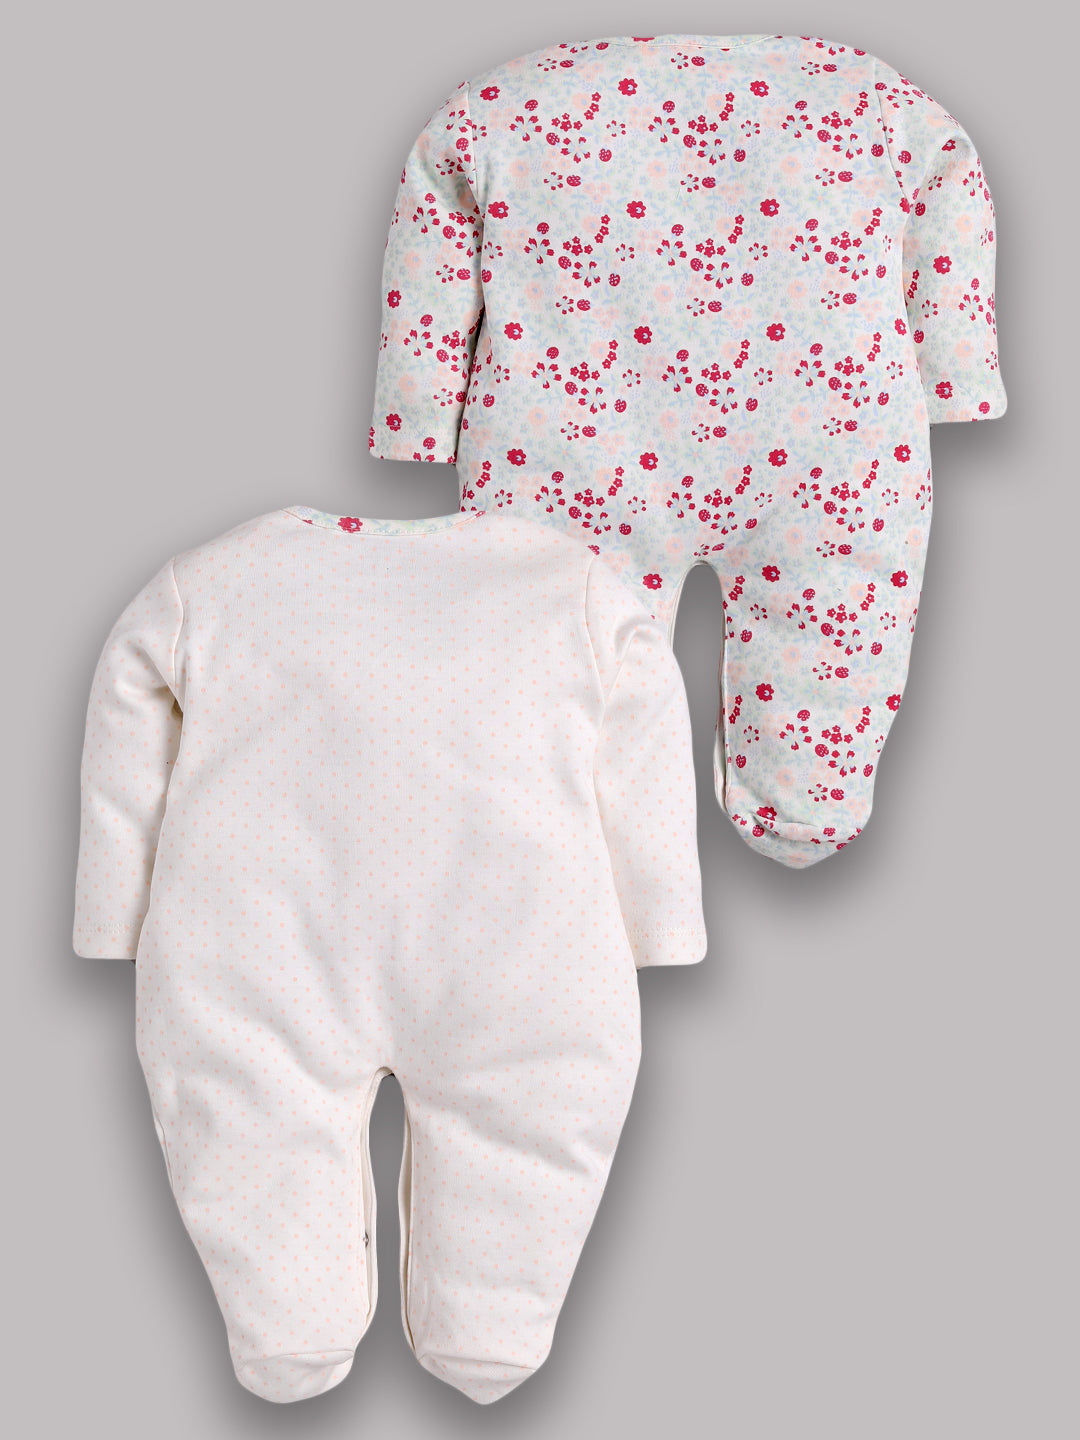 BabyGo 100% Cotton Rompers/Sleepsuits/Jumpsuit/Night Suits for Baby Boys & baby Girls, New-Born, infants, Pack of 2 Combo